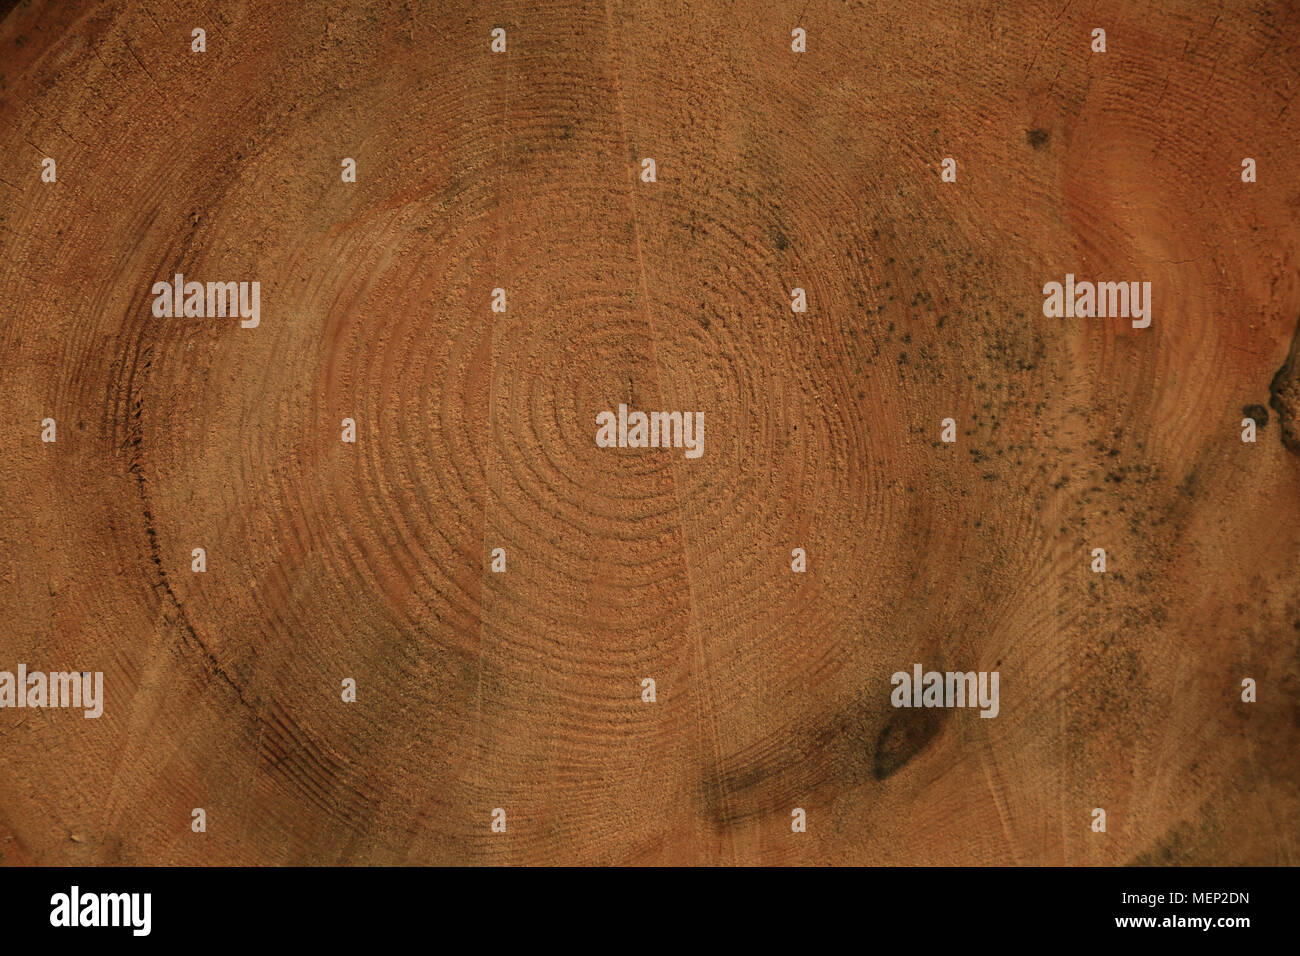 Wood texture, wood grain, tree rings, Scotts Pine by Malcolm Buckland, Design Eleven Stock Photo